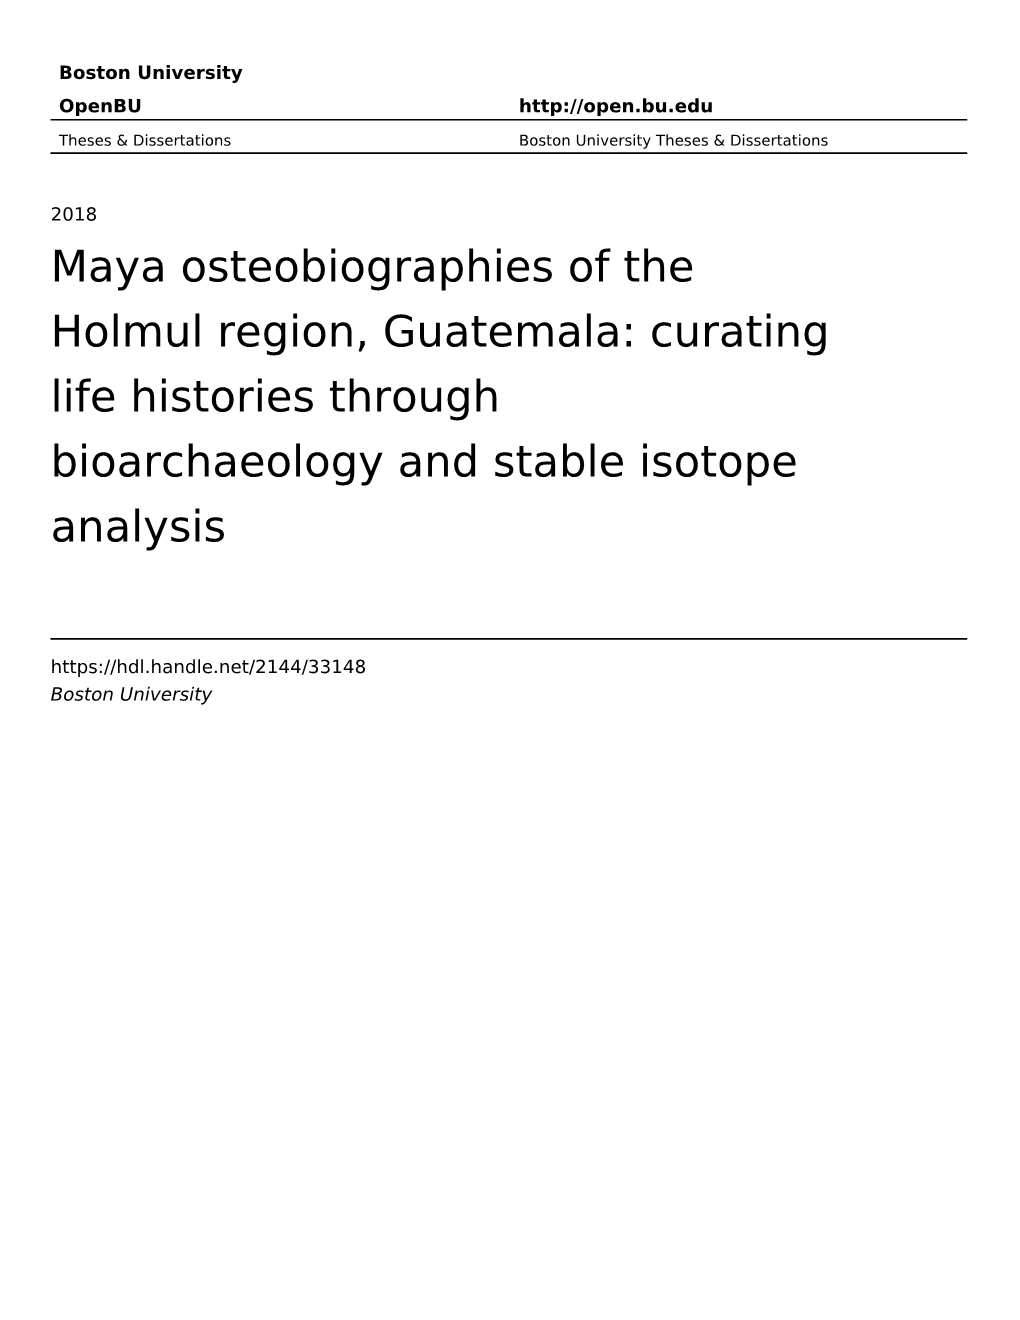 Maya Osteobiographies of the Holmul Region, Guatemala: Curating Life Histories Through Bioarchaeology and Stable Isotope Analysis